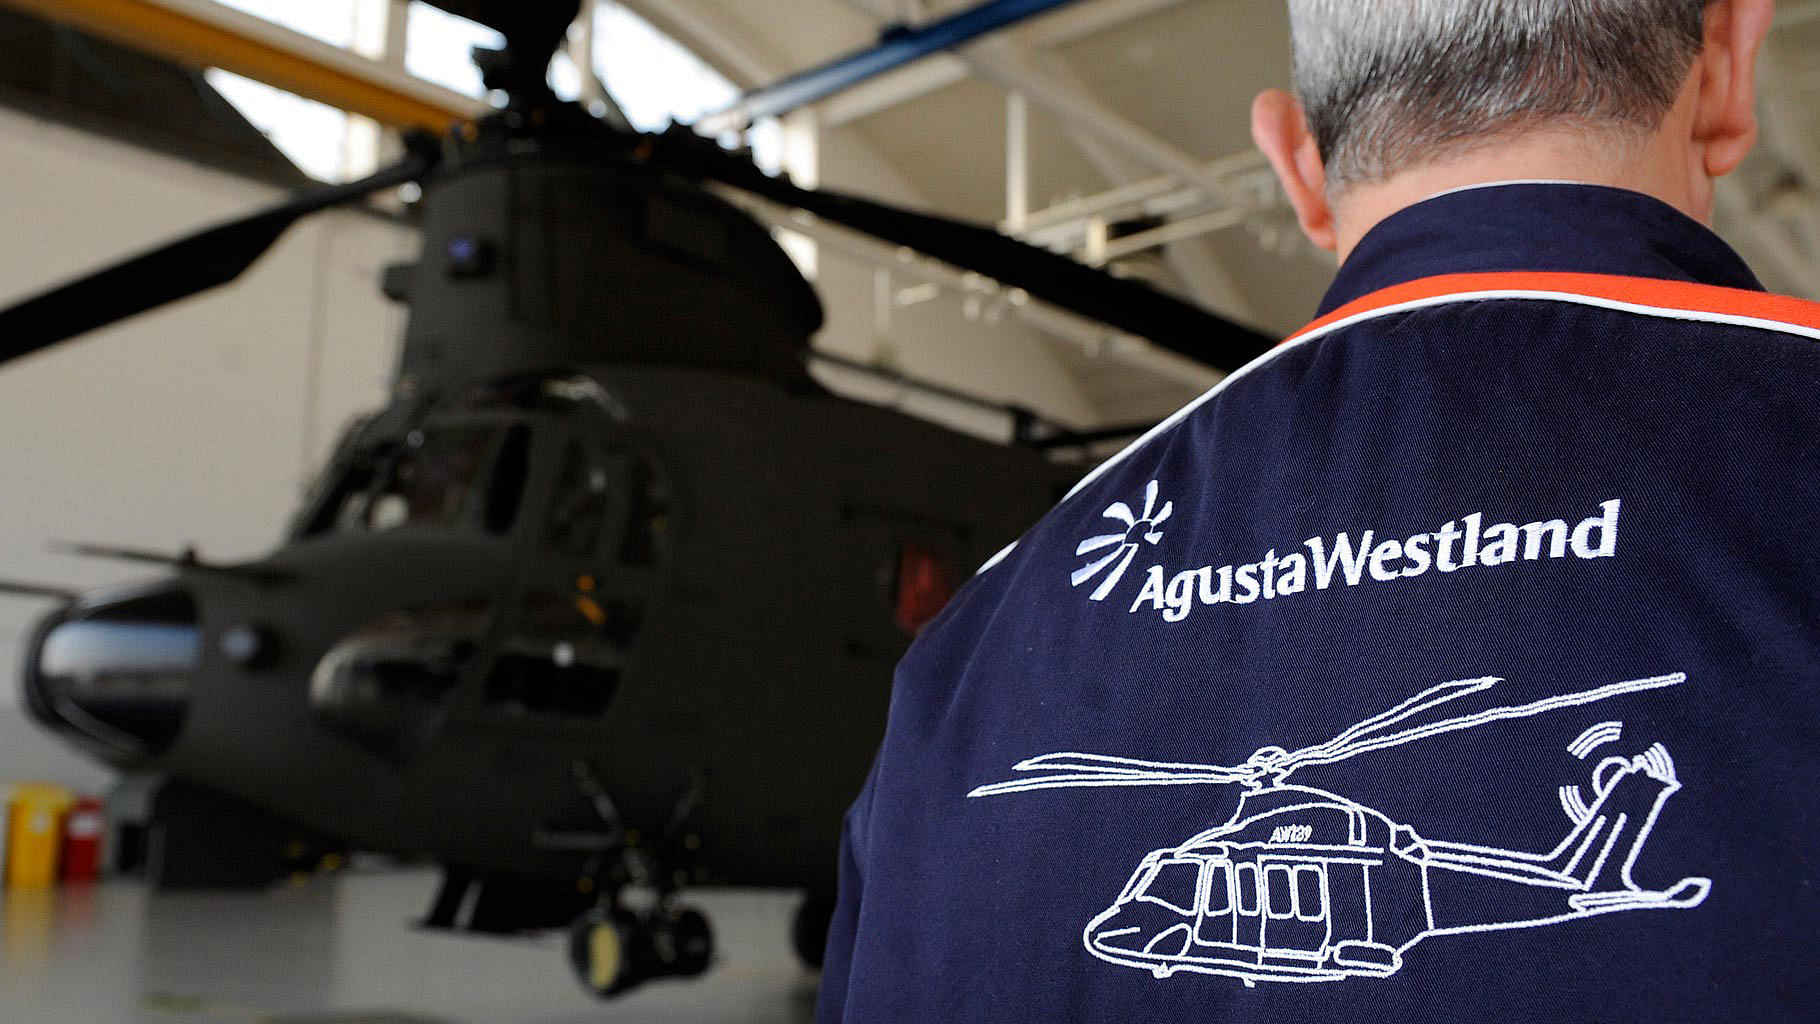 The Italian court had earlier ruled that the deal to purchase 12 VVIP helicopters by India from AgustaWestland involved international corruption.